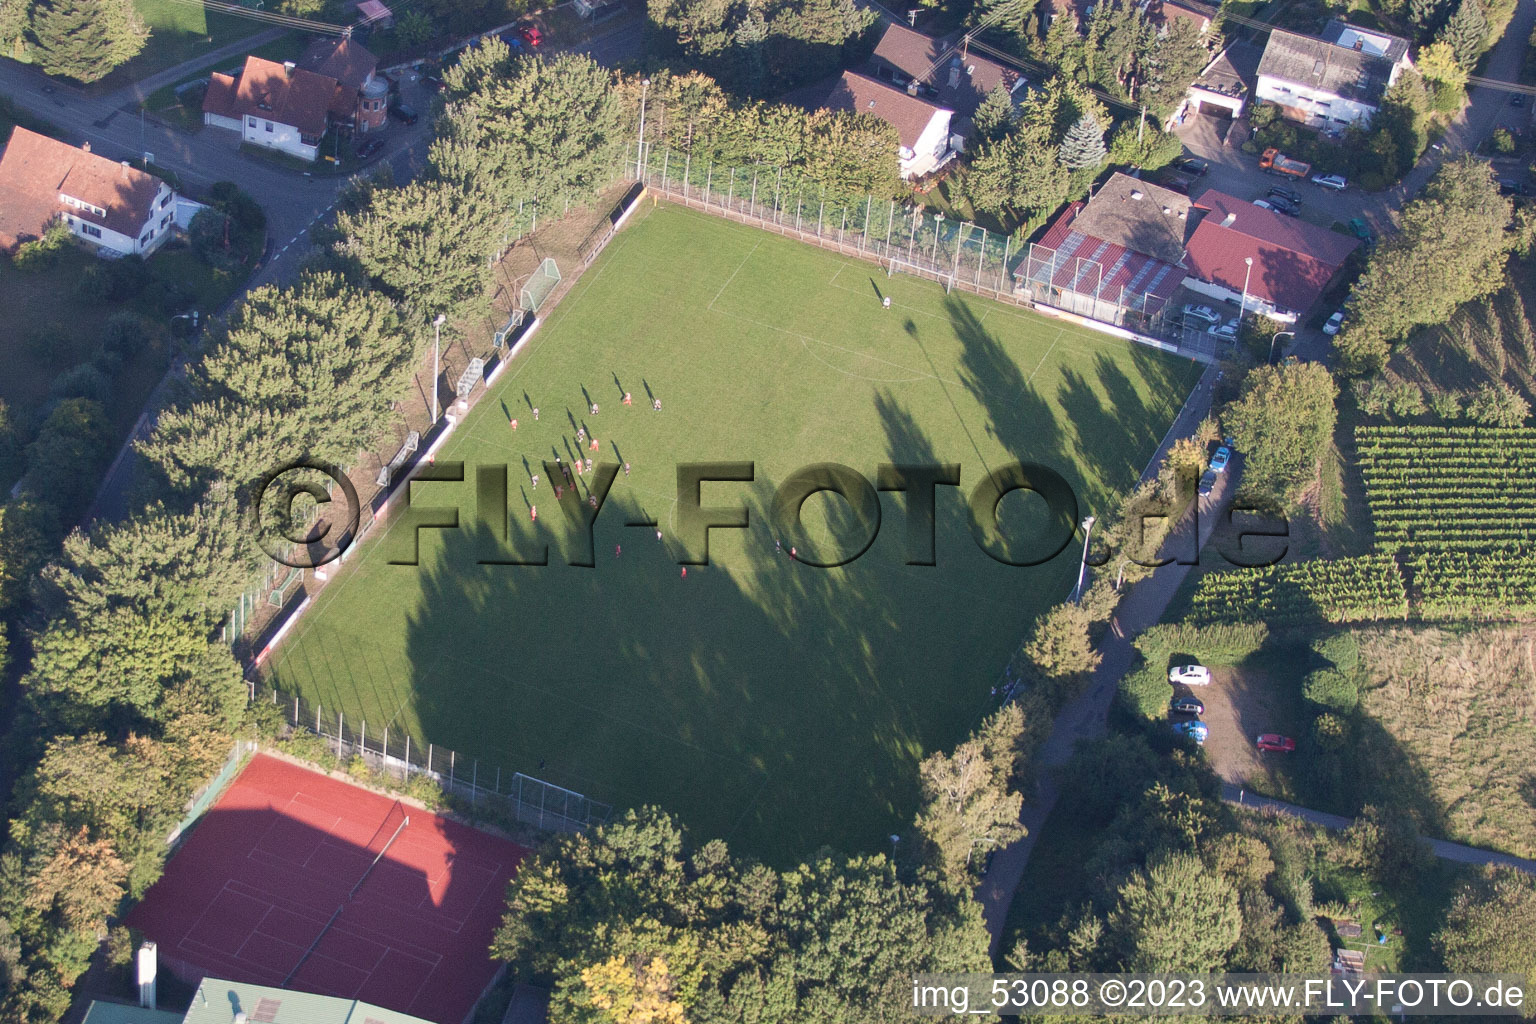 South Baden sports school in Steinbach in the state Baden-Wuerttemberg, Germany from the plane